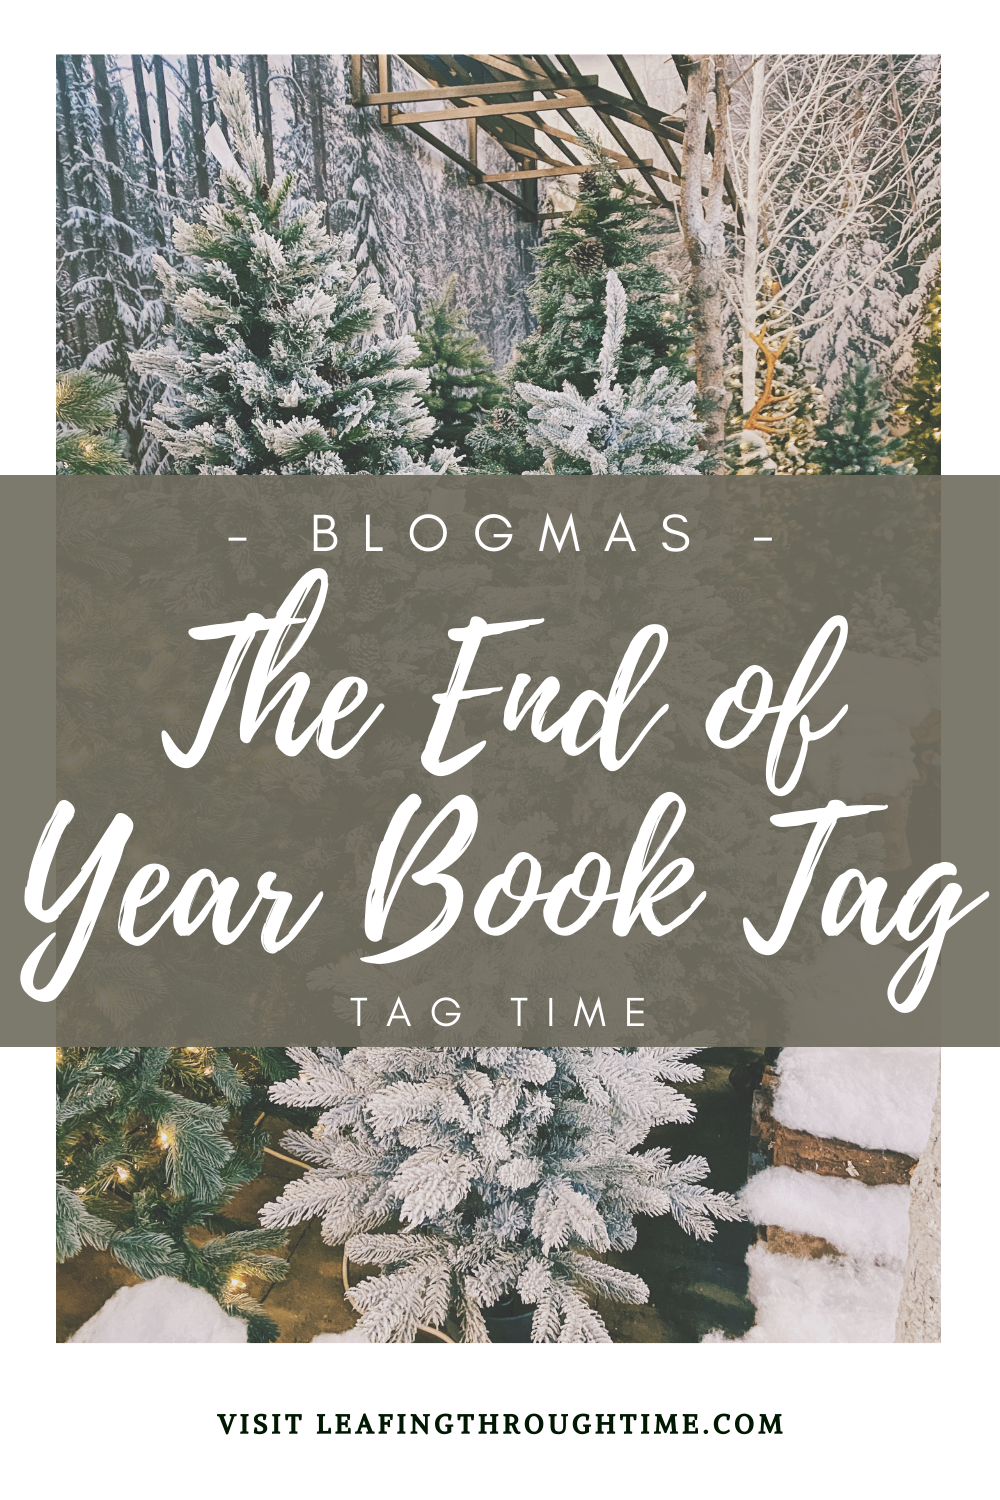 Tag Time – The End of Year Book Tag